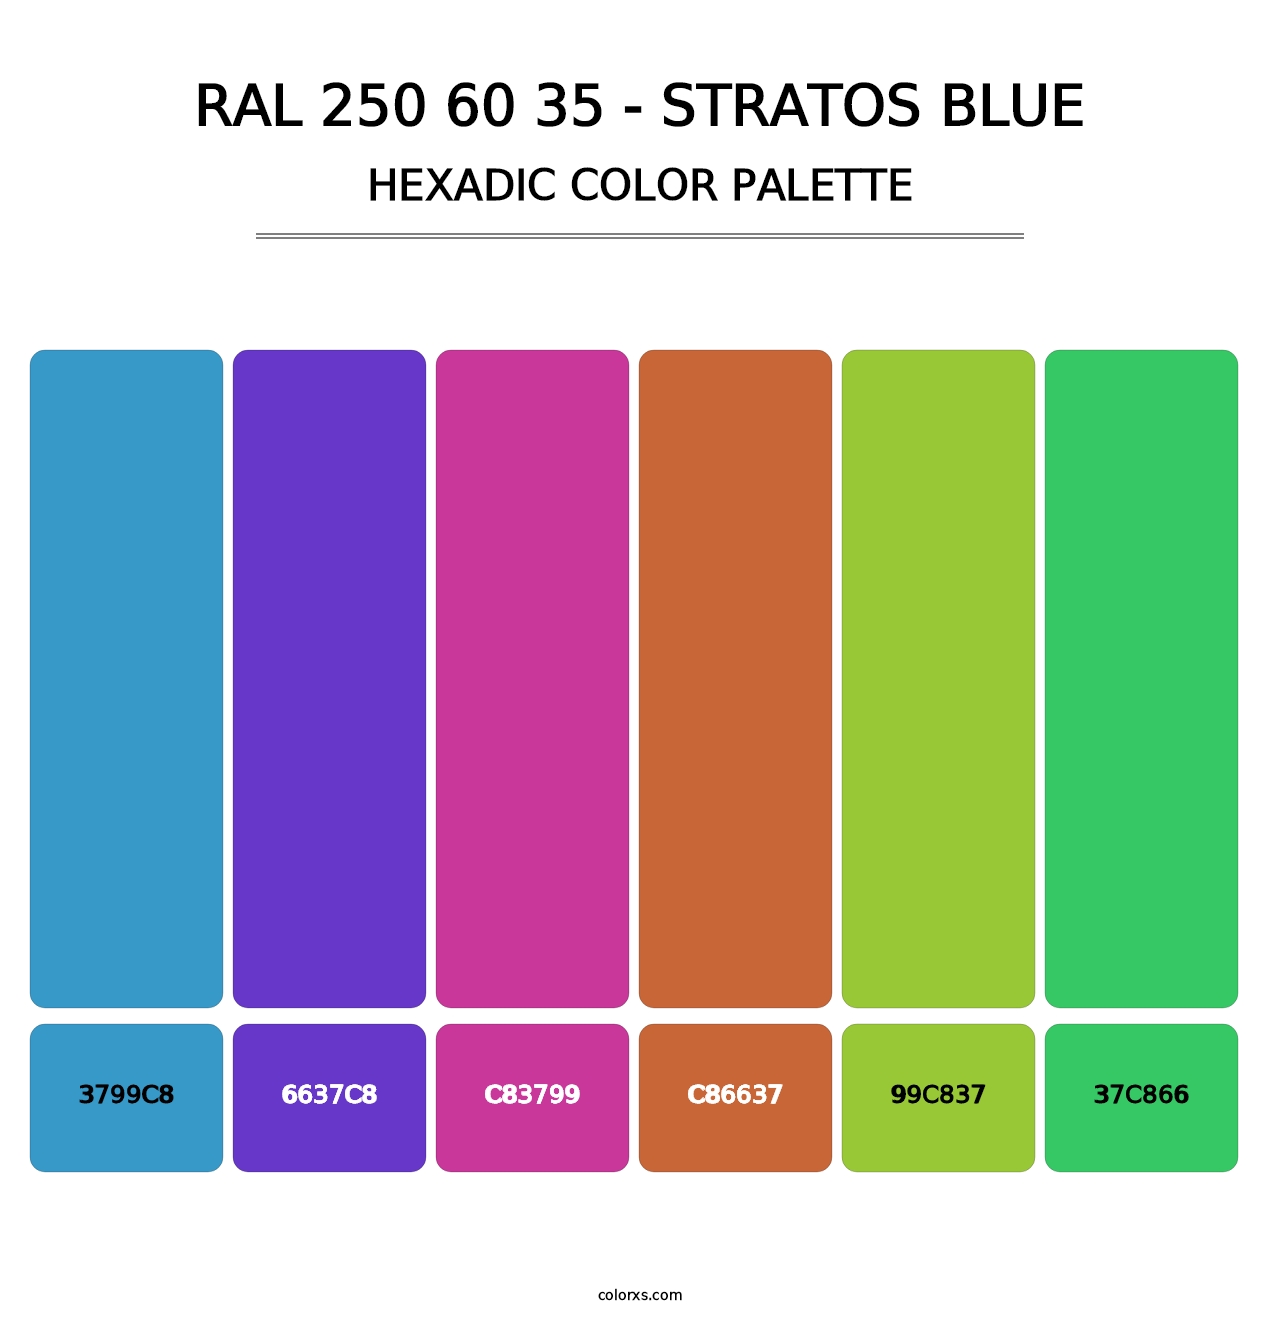 RAL 250 60 35 - Stratos Blue - Hexadic Color Palette